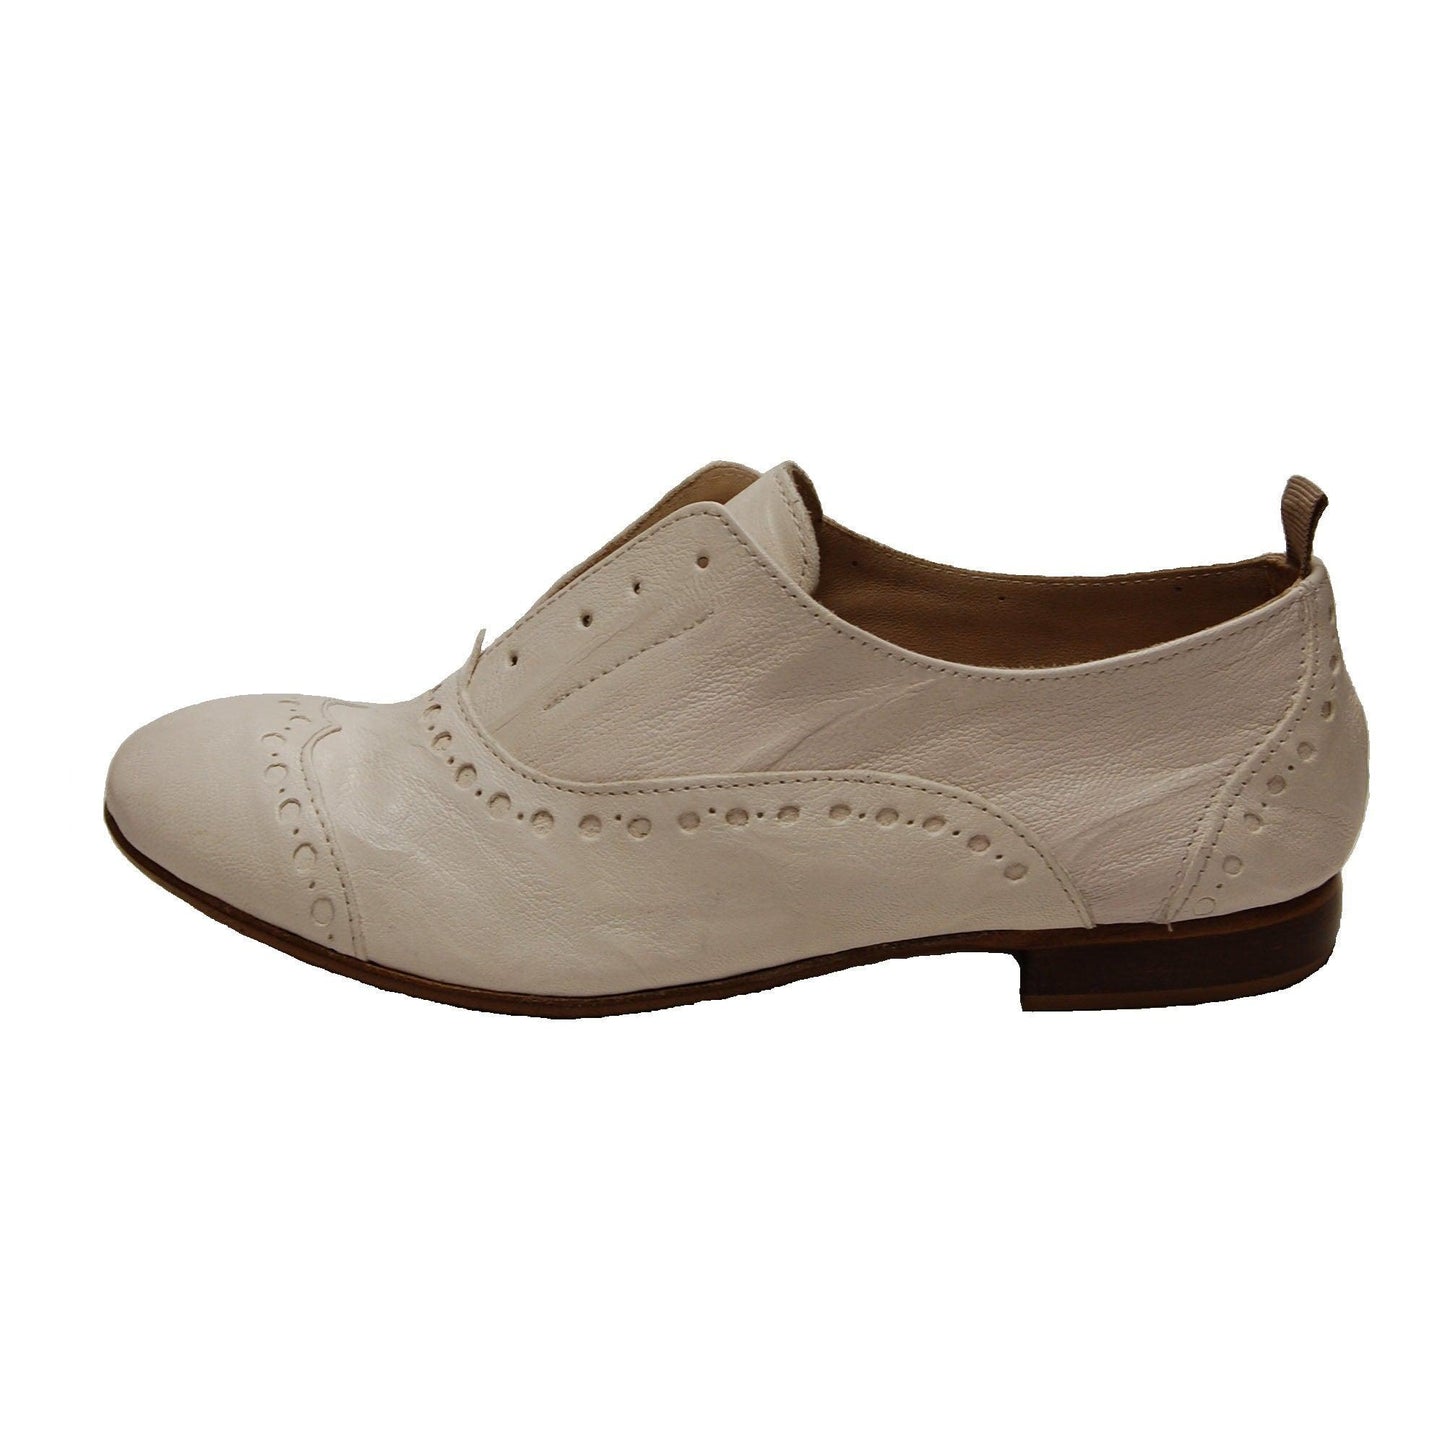 GIUSY 070 - Texas Leather SHOES OPTIC WHITE - History541